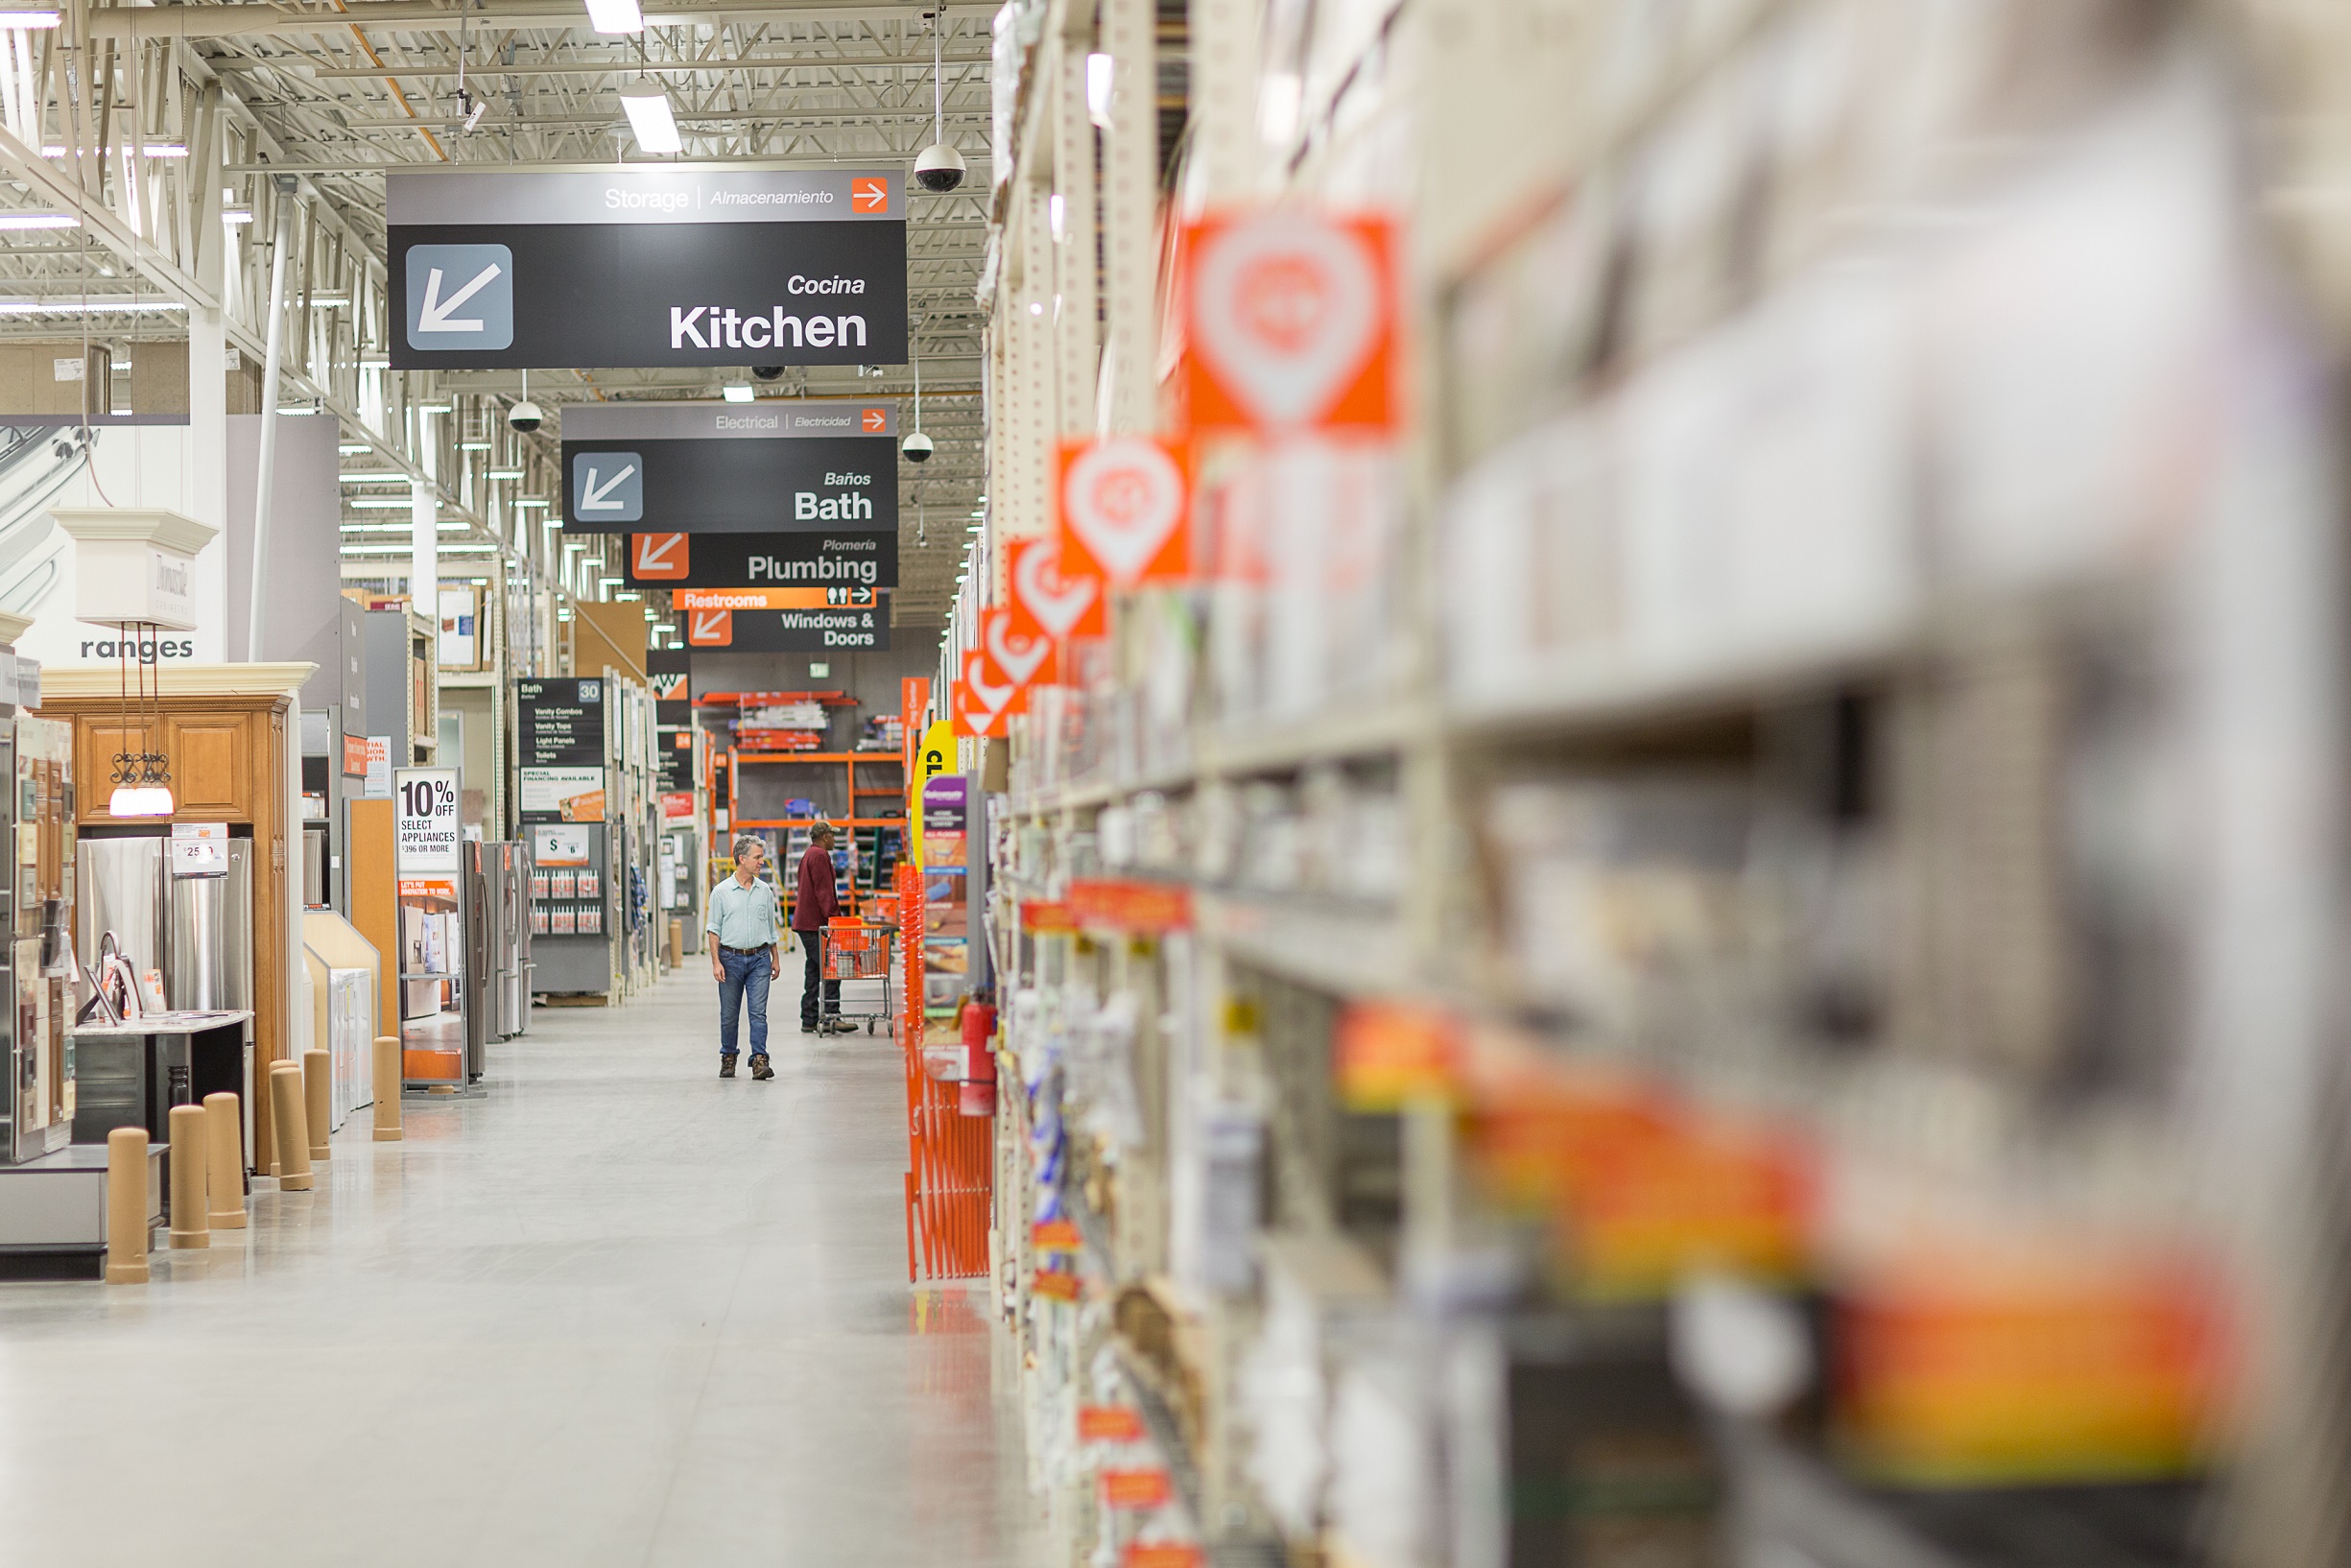 Home Depot Hopes to Beat Supply Chain Woes